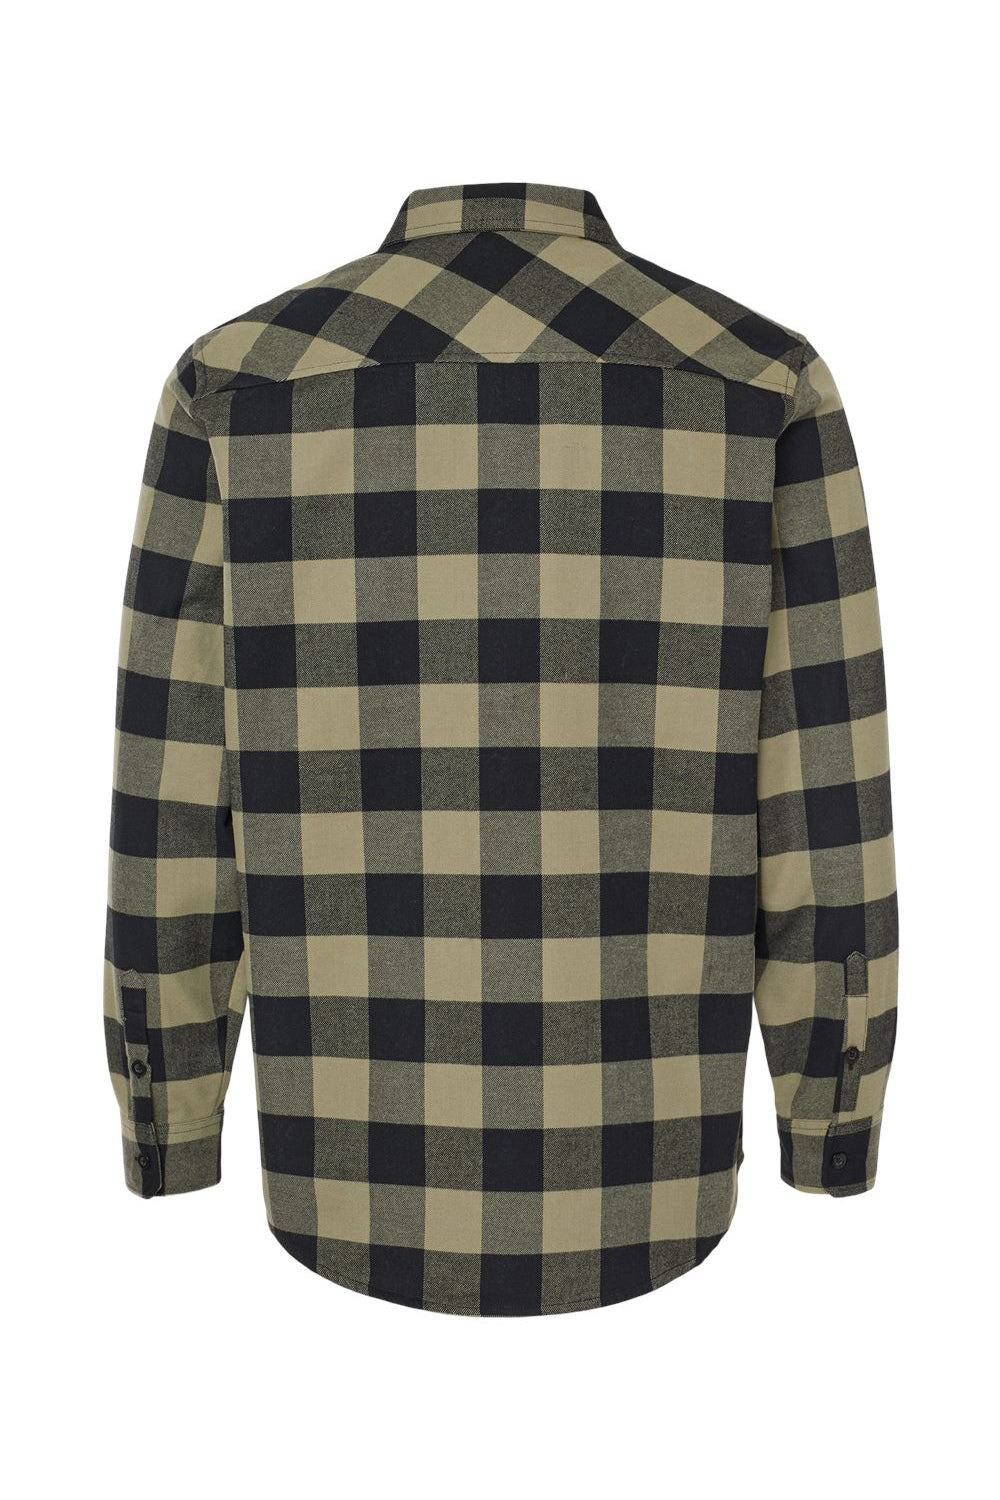 Independent Trading Co. EXP50F Mens Long Sleeve Button Down Flannel Shirt w/ Double Pockets Olive Green/Black Flat Back